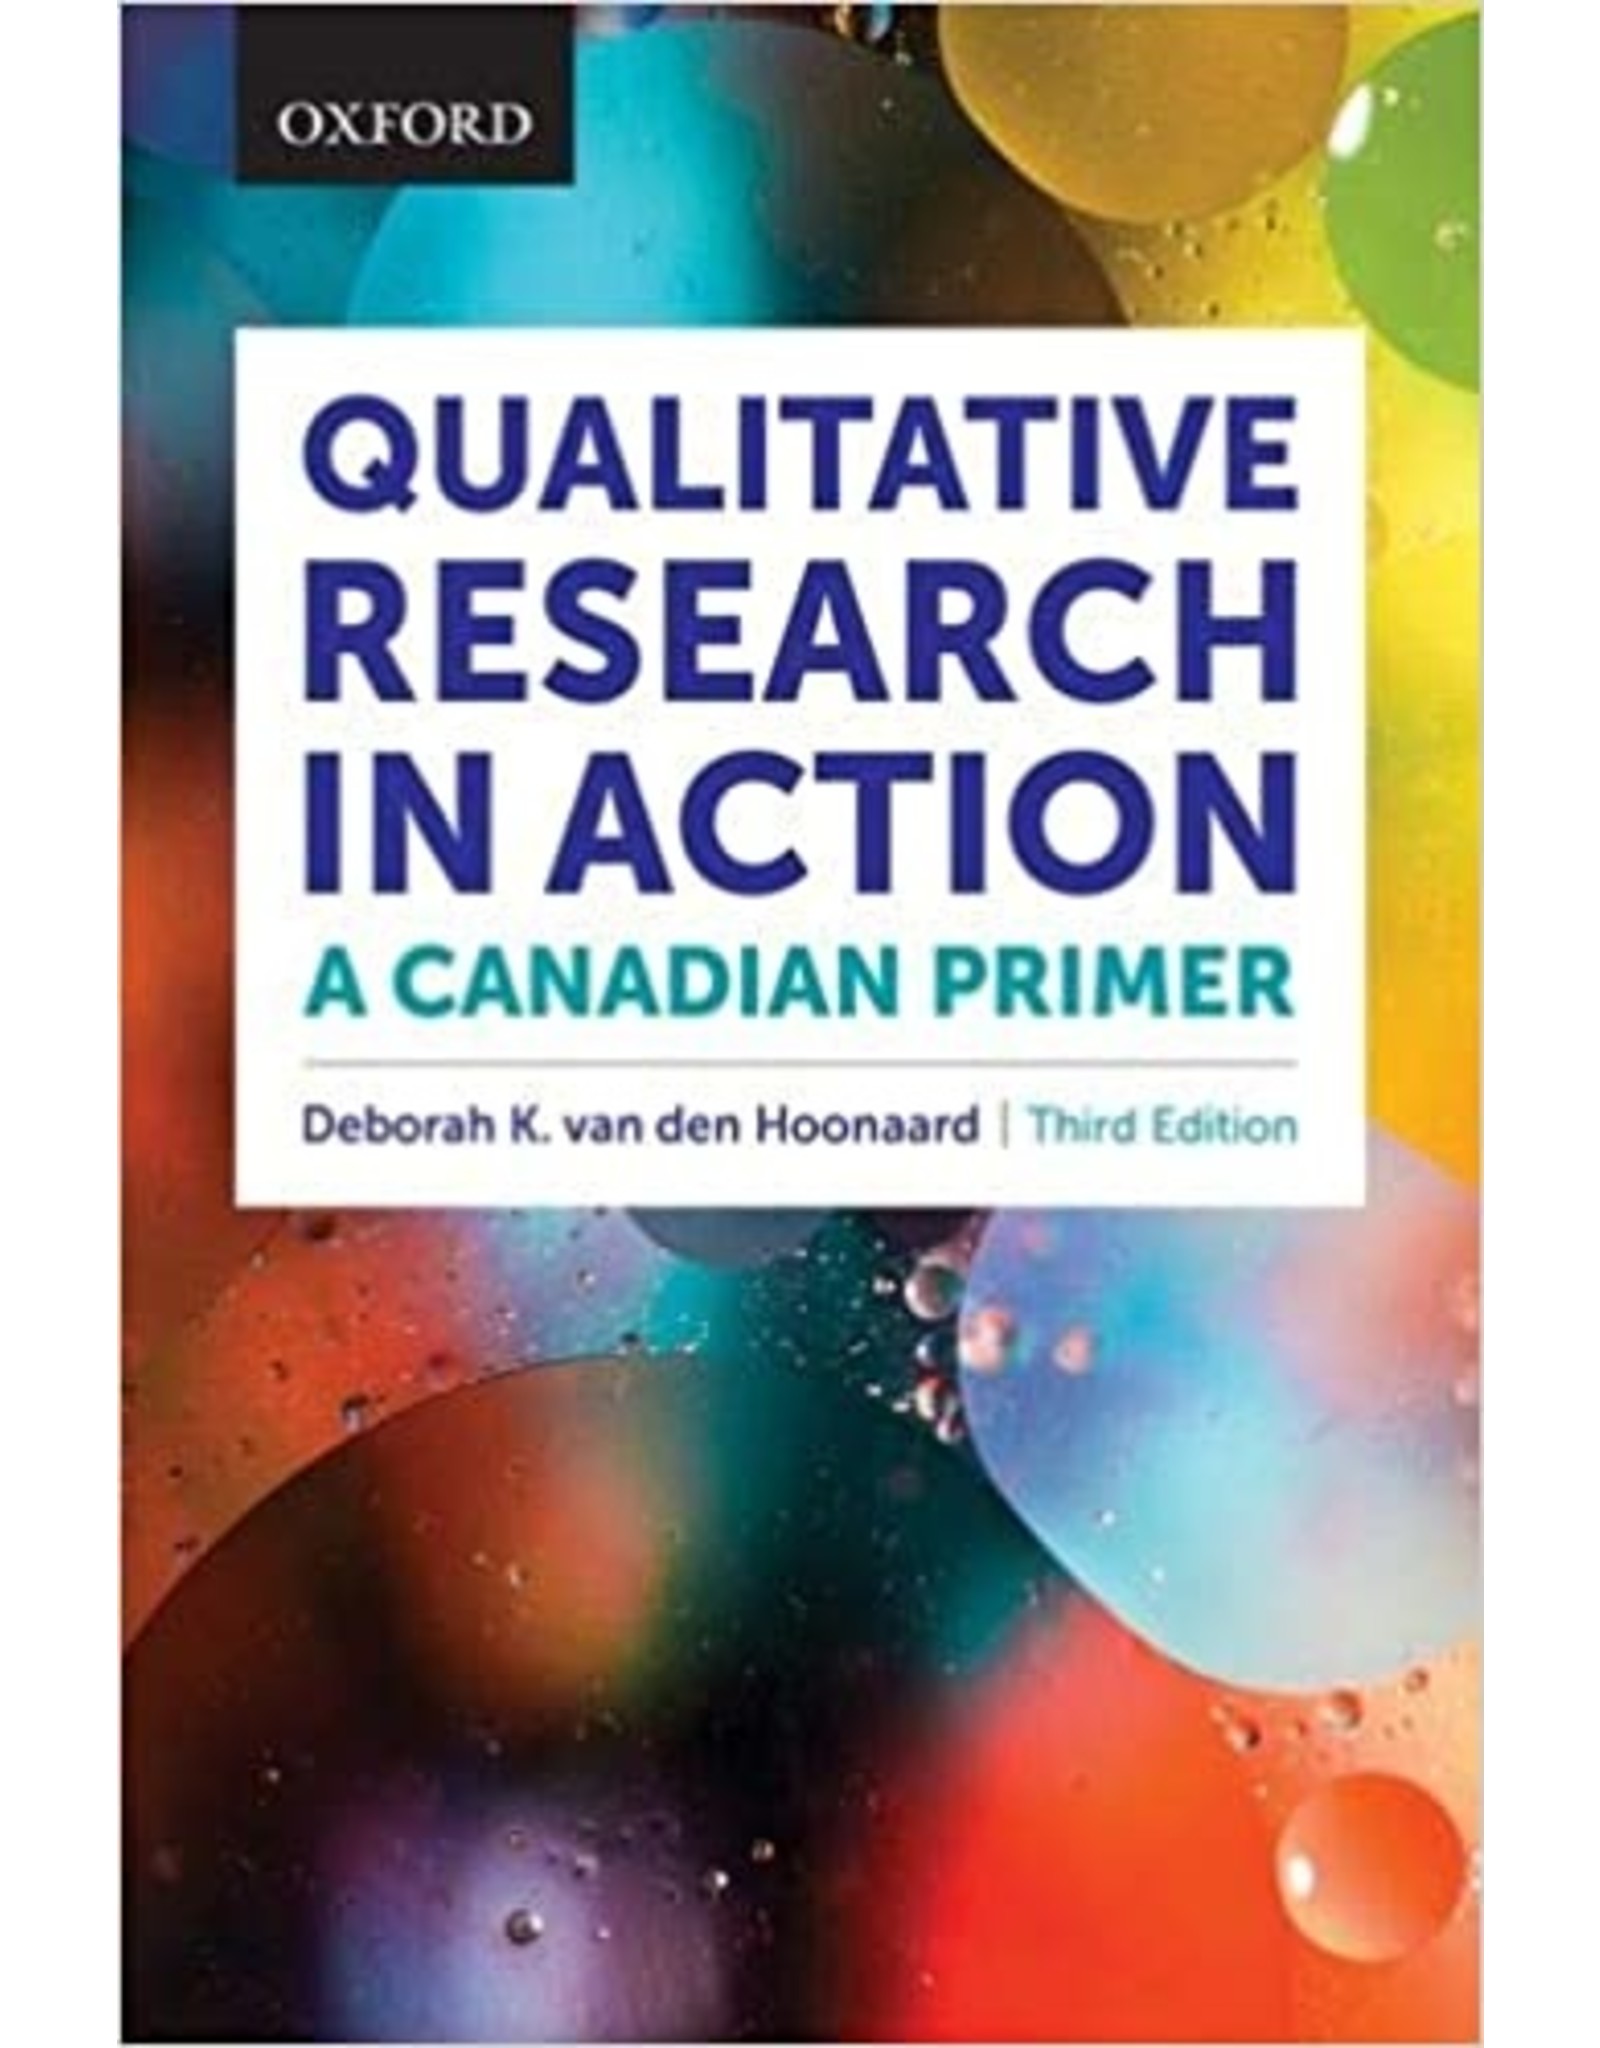 Textbook Qualitative Research in Action: A Canadian Primer, Third Edition